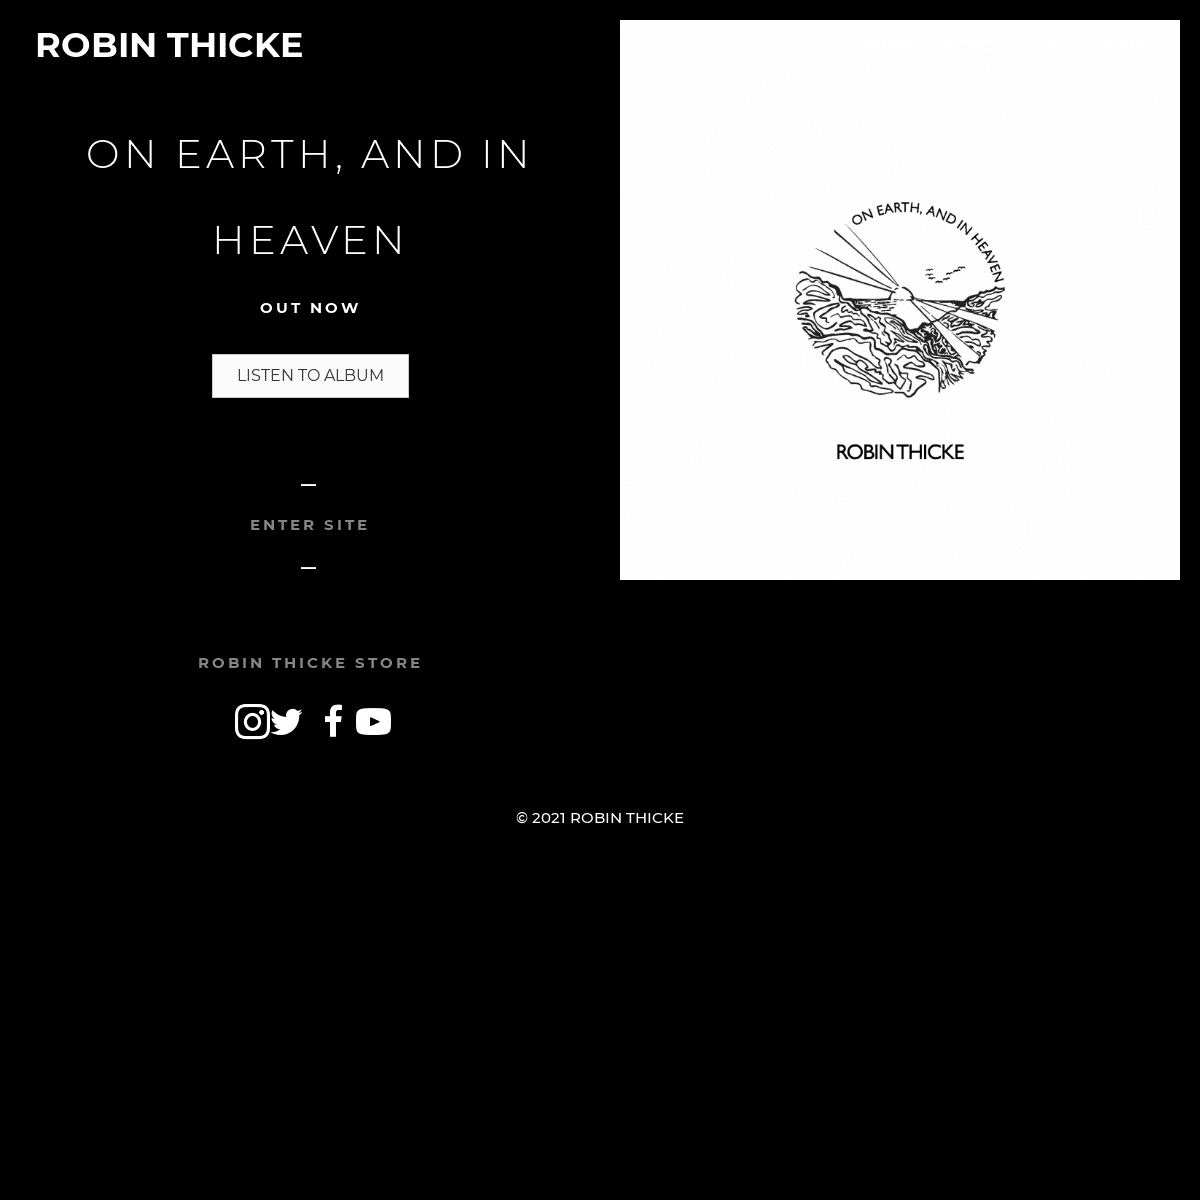 A complete backup of https://robinthicke.com